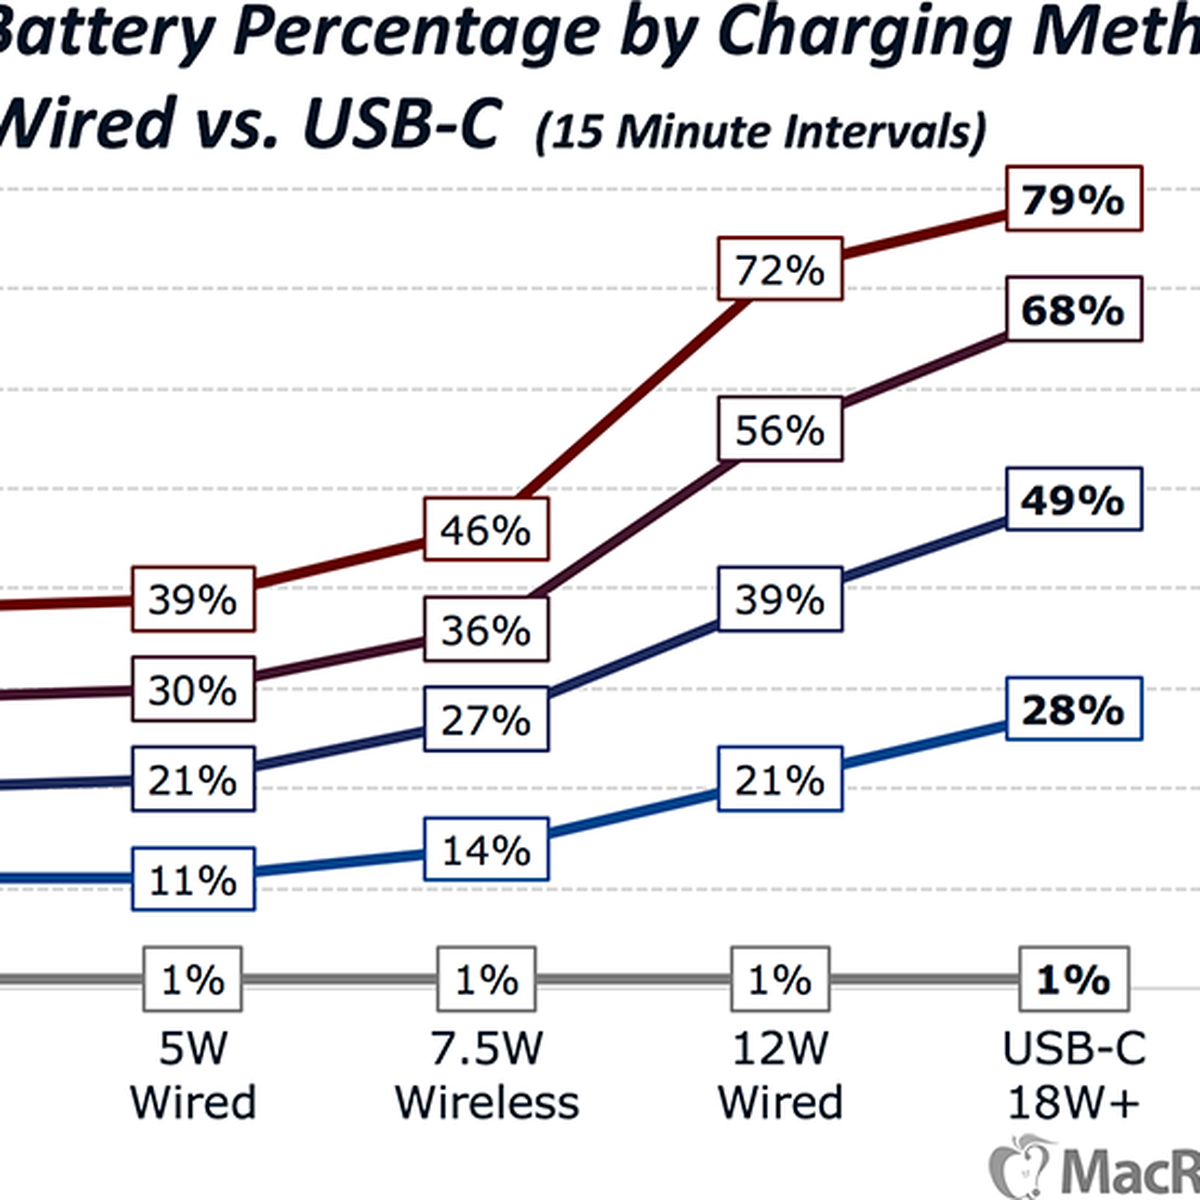 iPhone X Charging Speeds Compared: The Fastest and Easiest Ways to Charge  Your iPhone - MacRumors